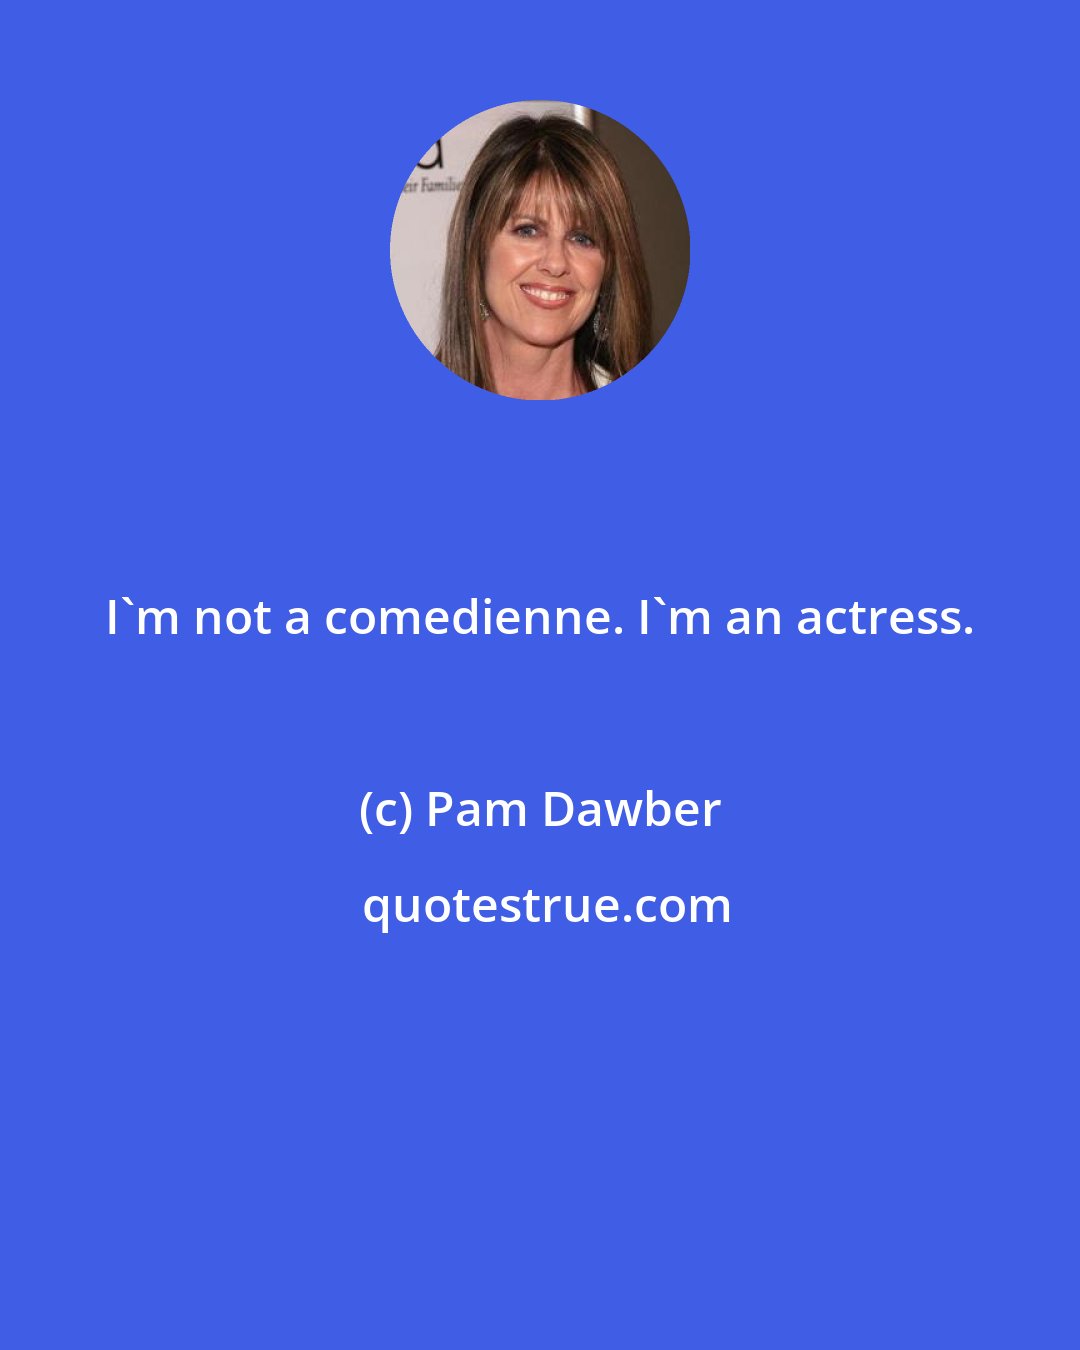 Pam Dawber: I'm not a comedienne. I'm an actress.